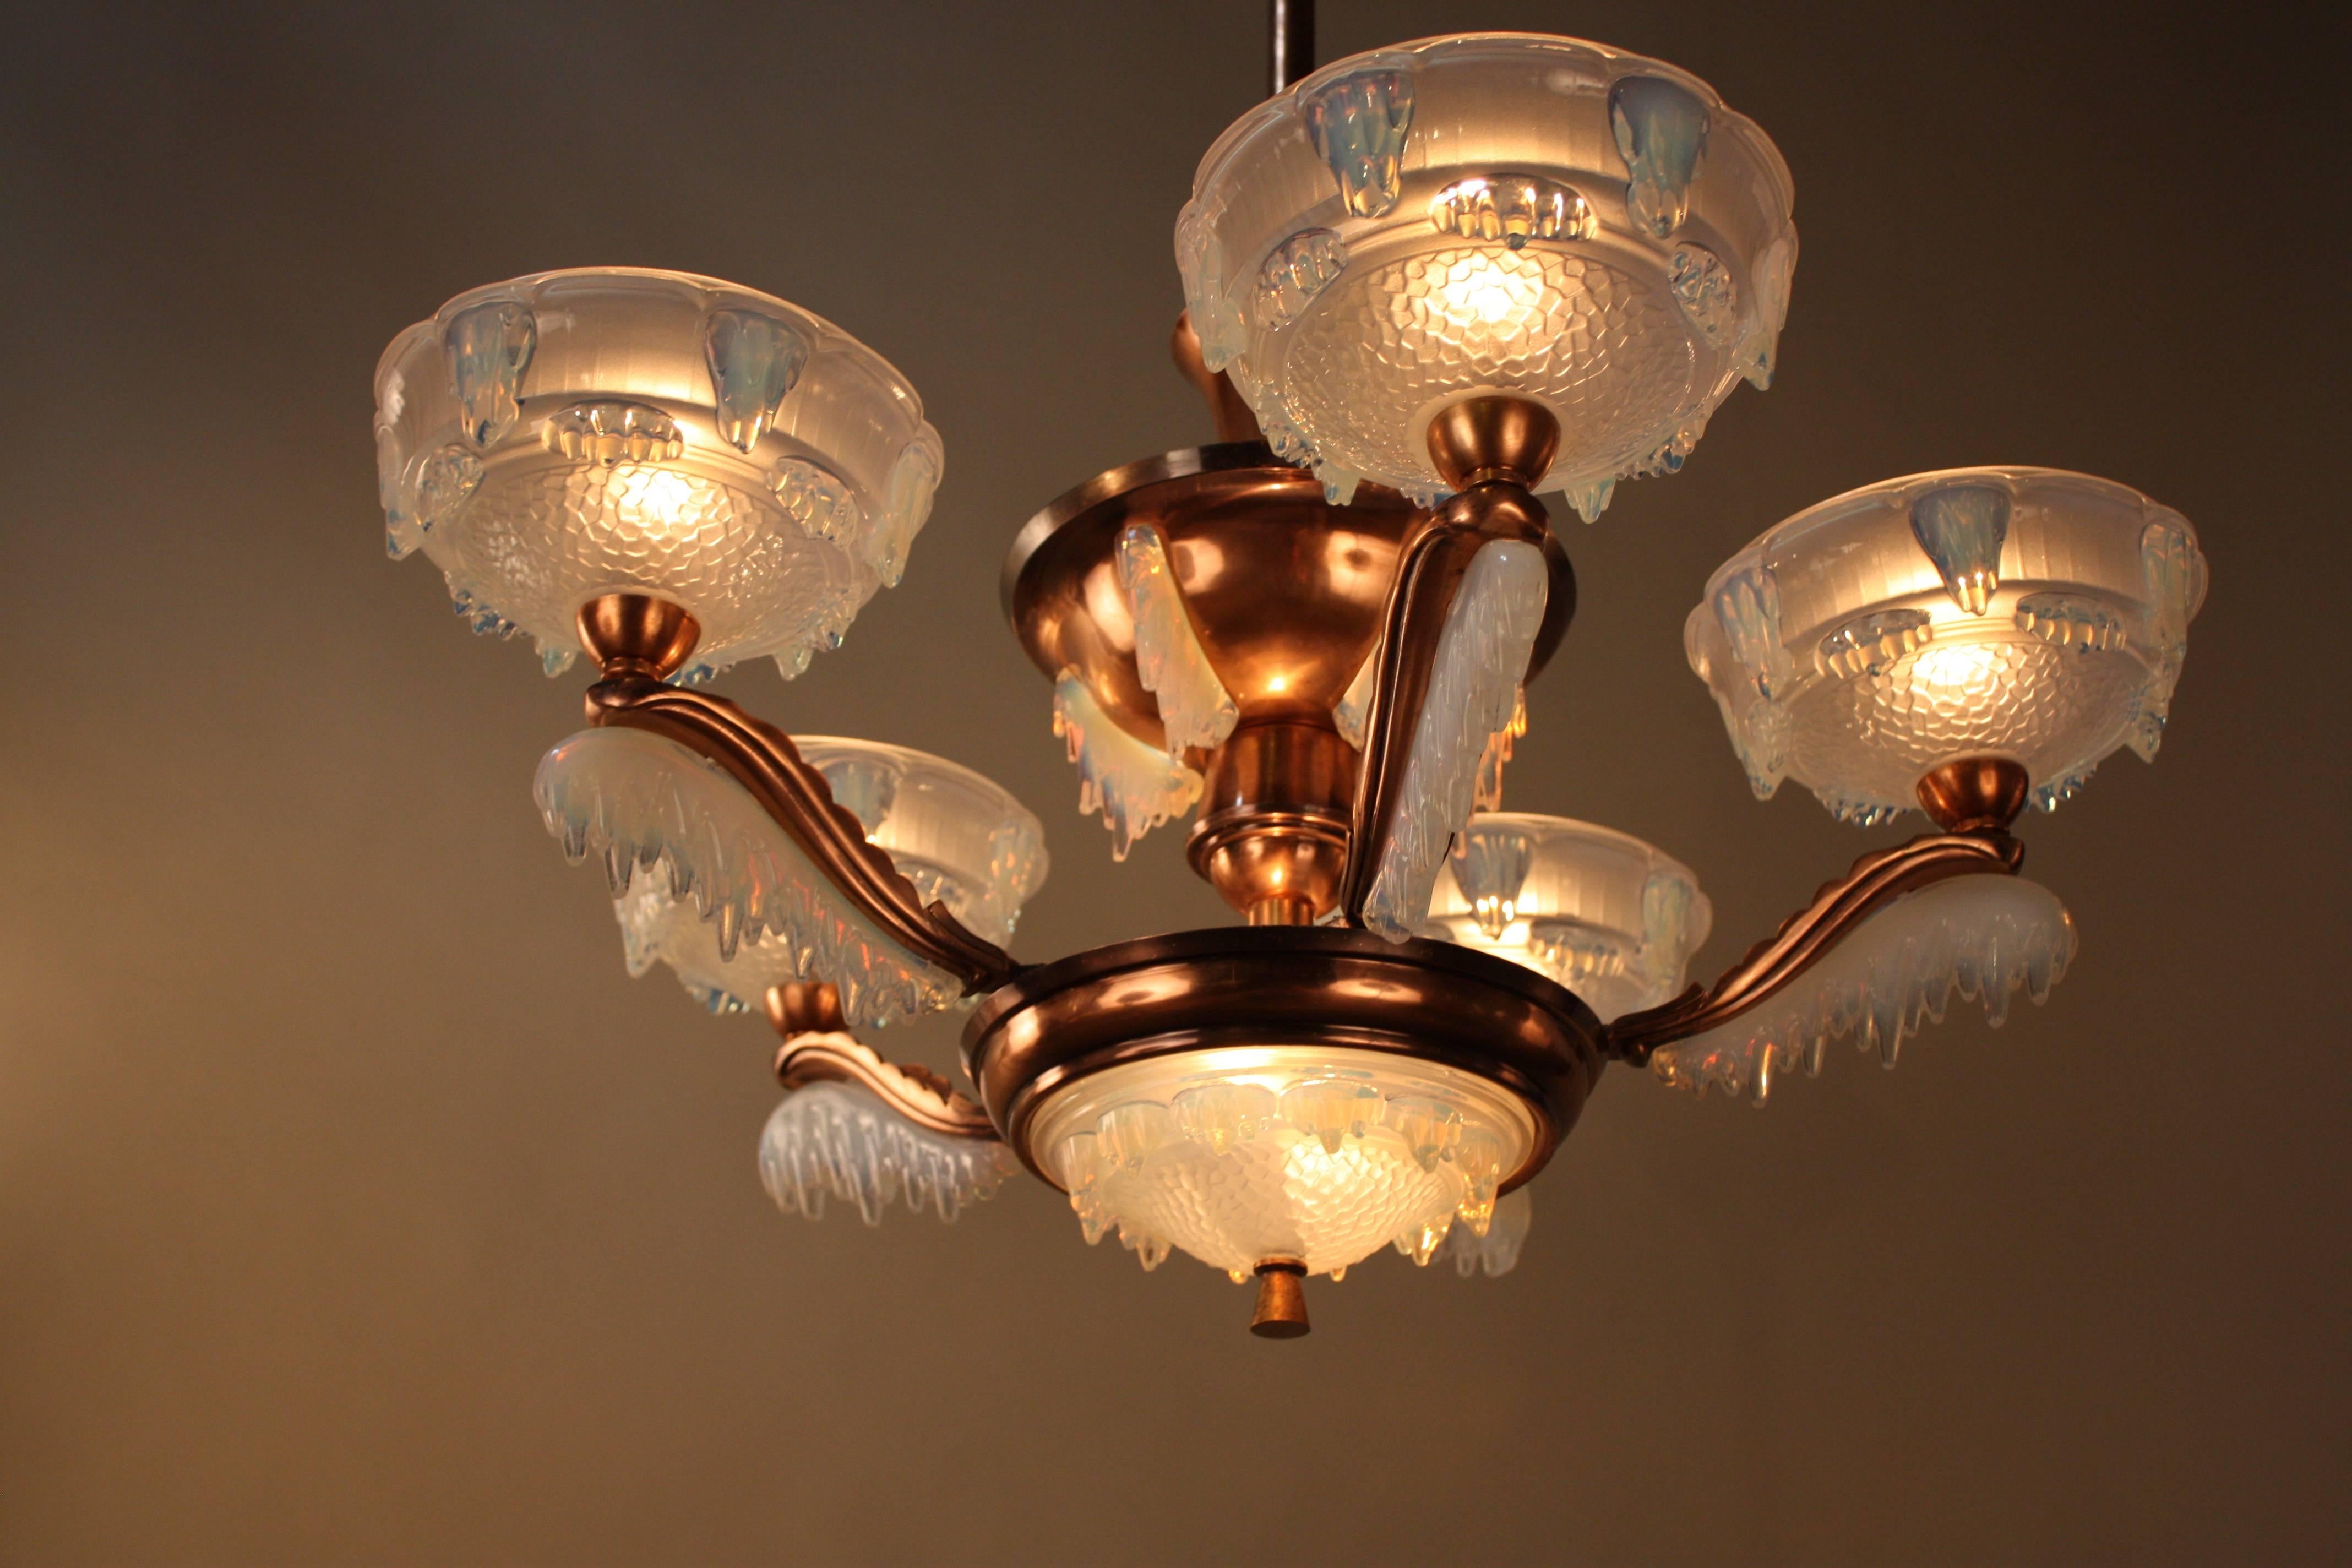 Art Deco chandelier with opalescent glass and copper plate on bronze frame by Ezan.
Total of nine lights 60watts each.